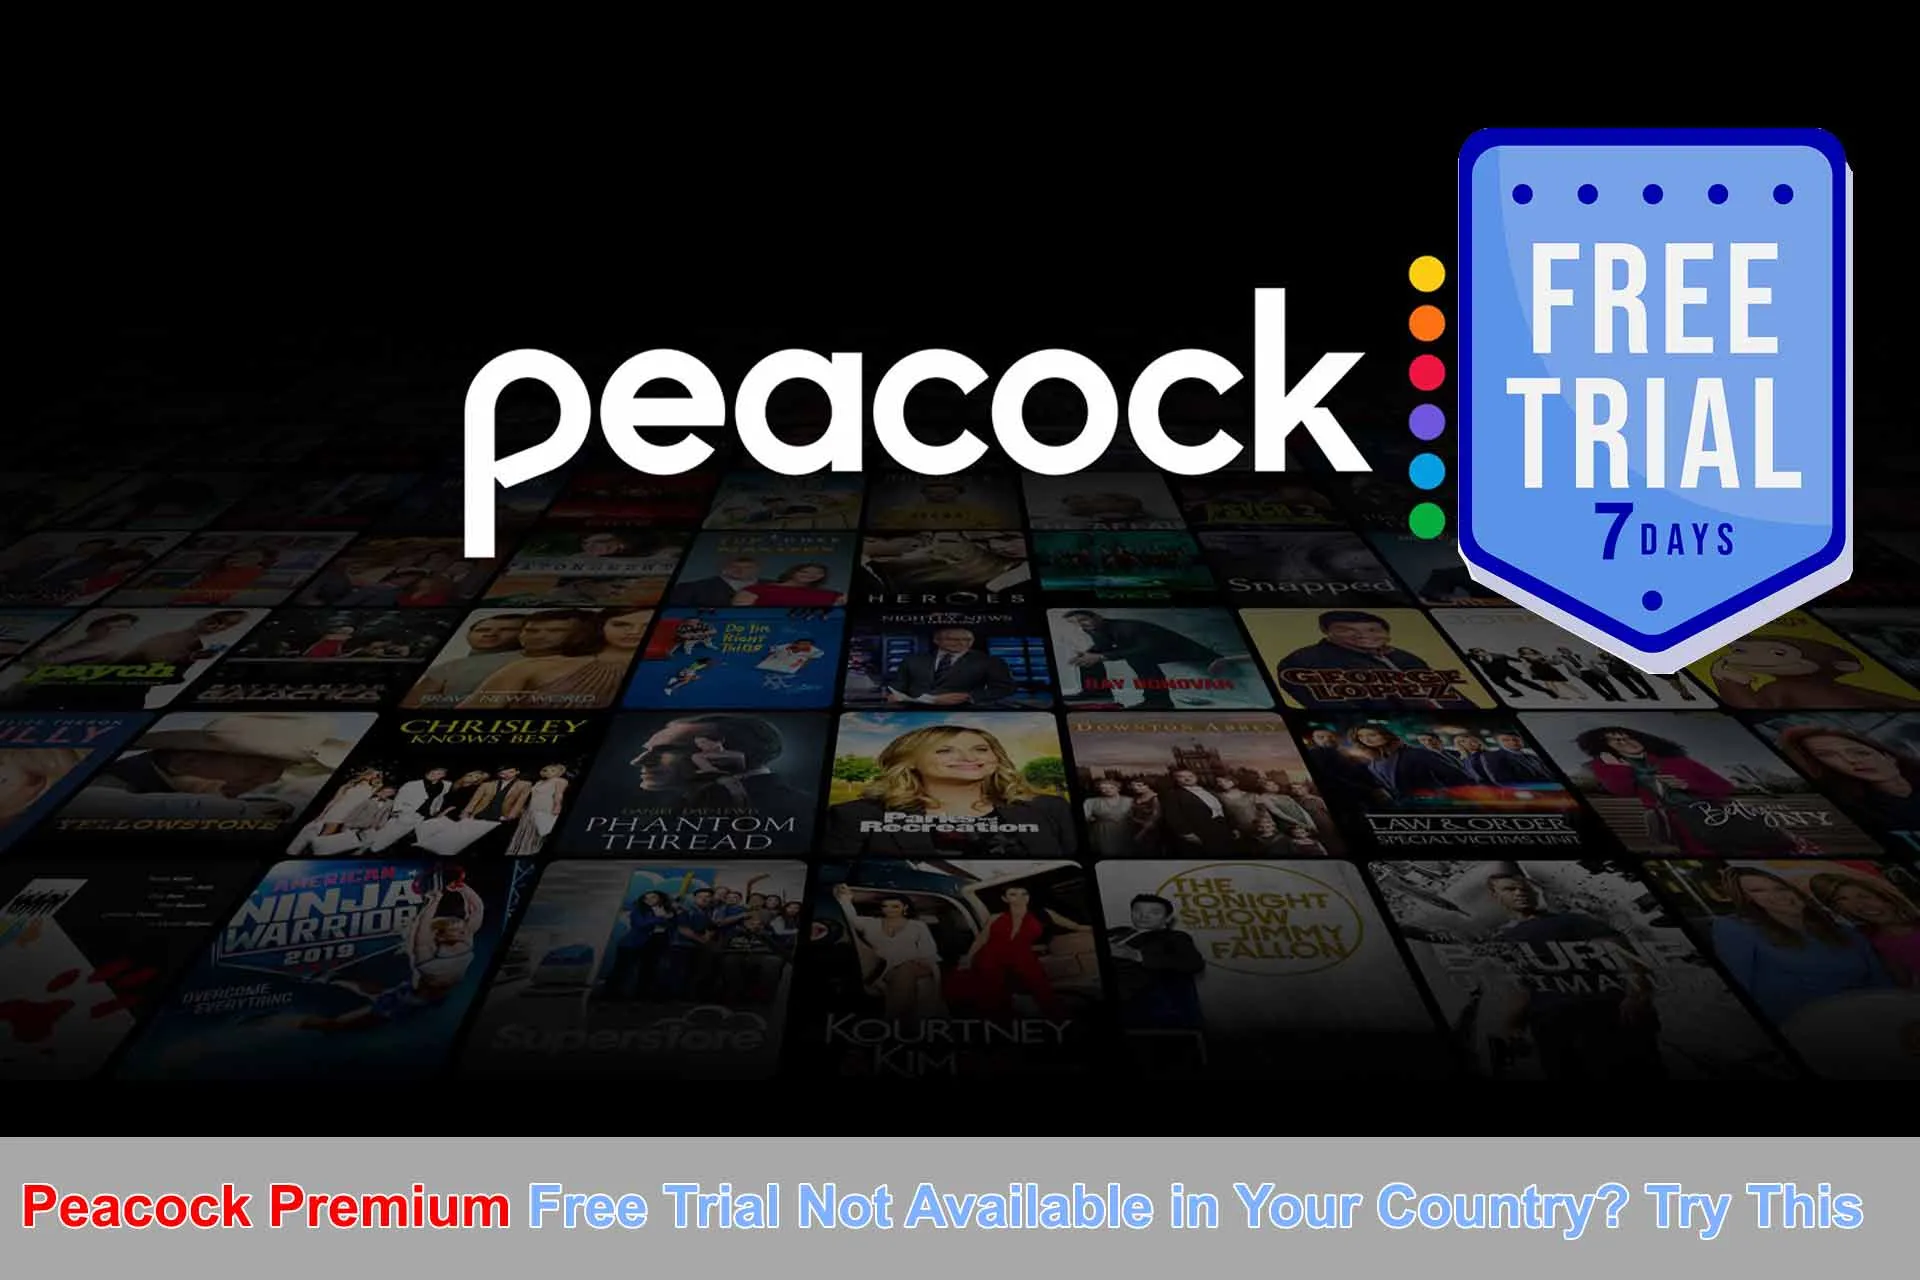 Peacock Premium Free Trial Not Available in Your Country